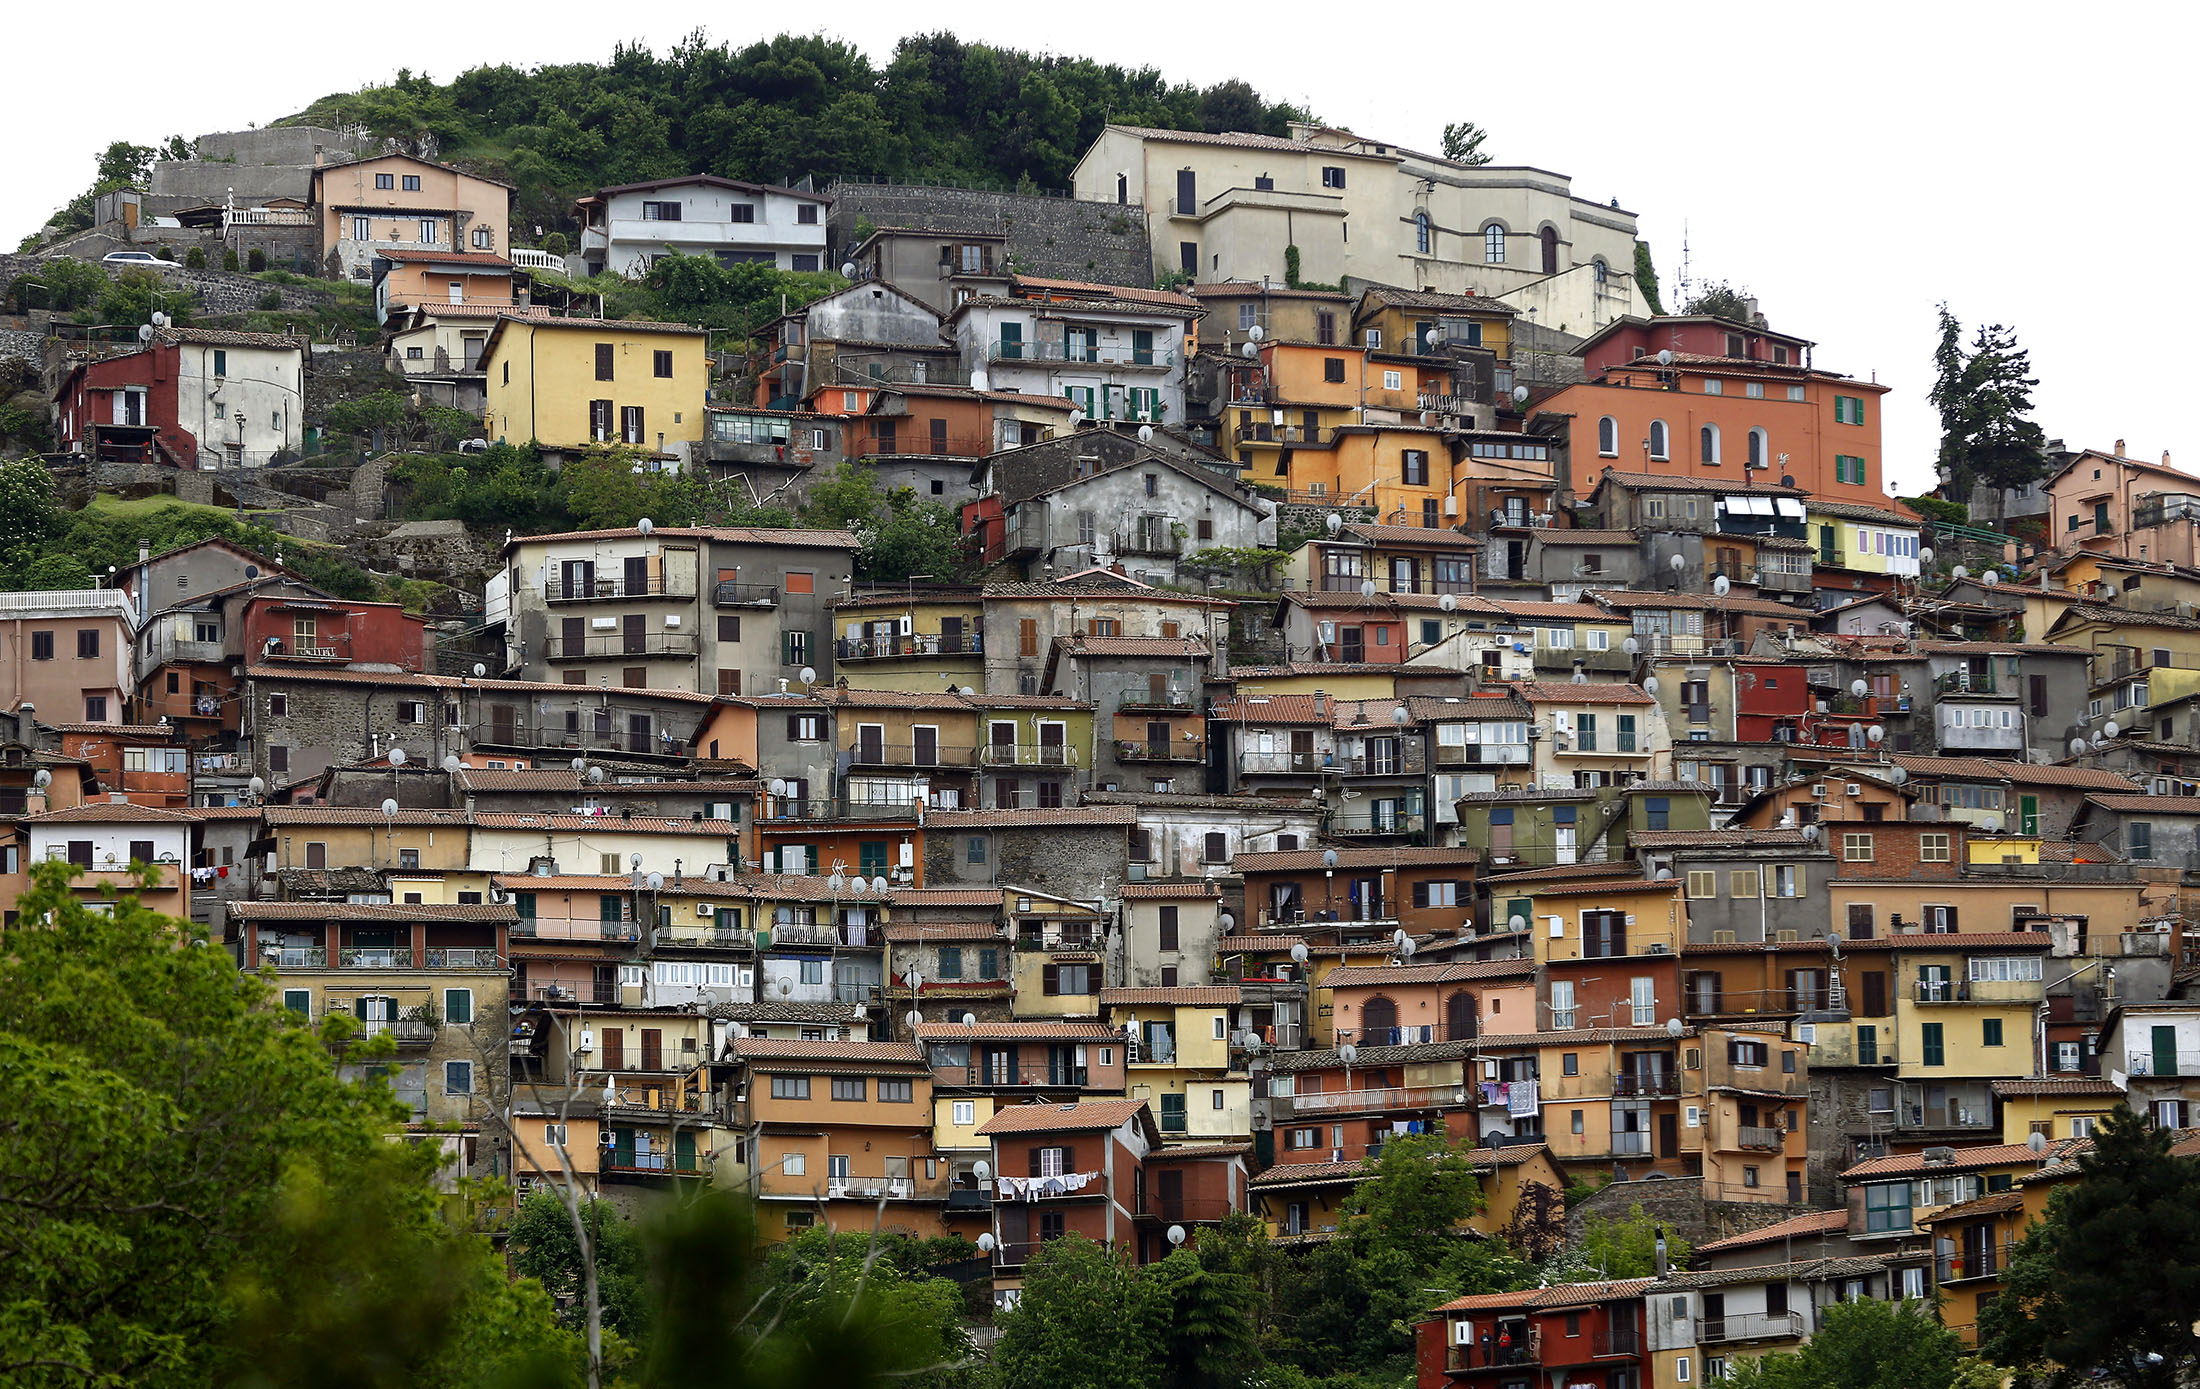 Traditional painted houses stand on a hillside in the town of Rocca di Papa, Italy.
